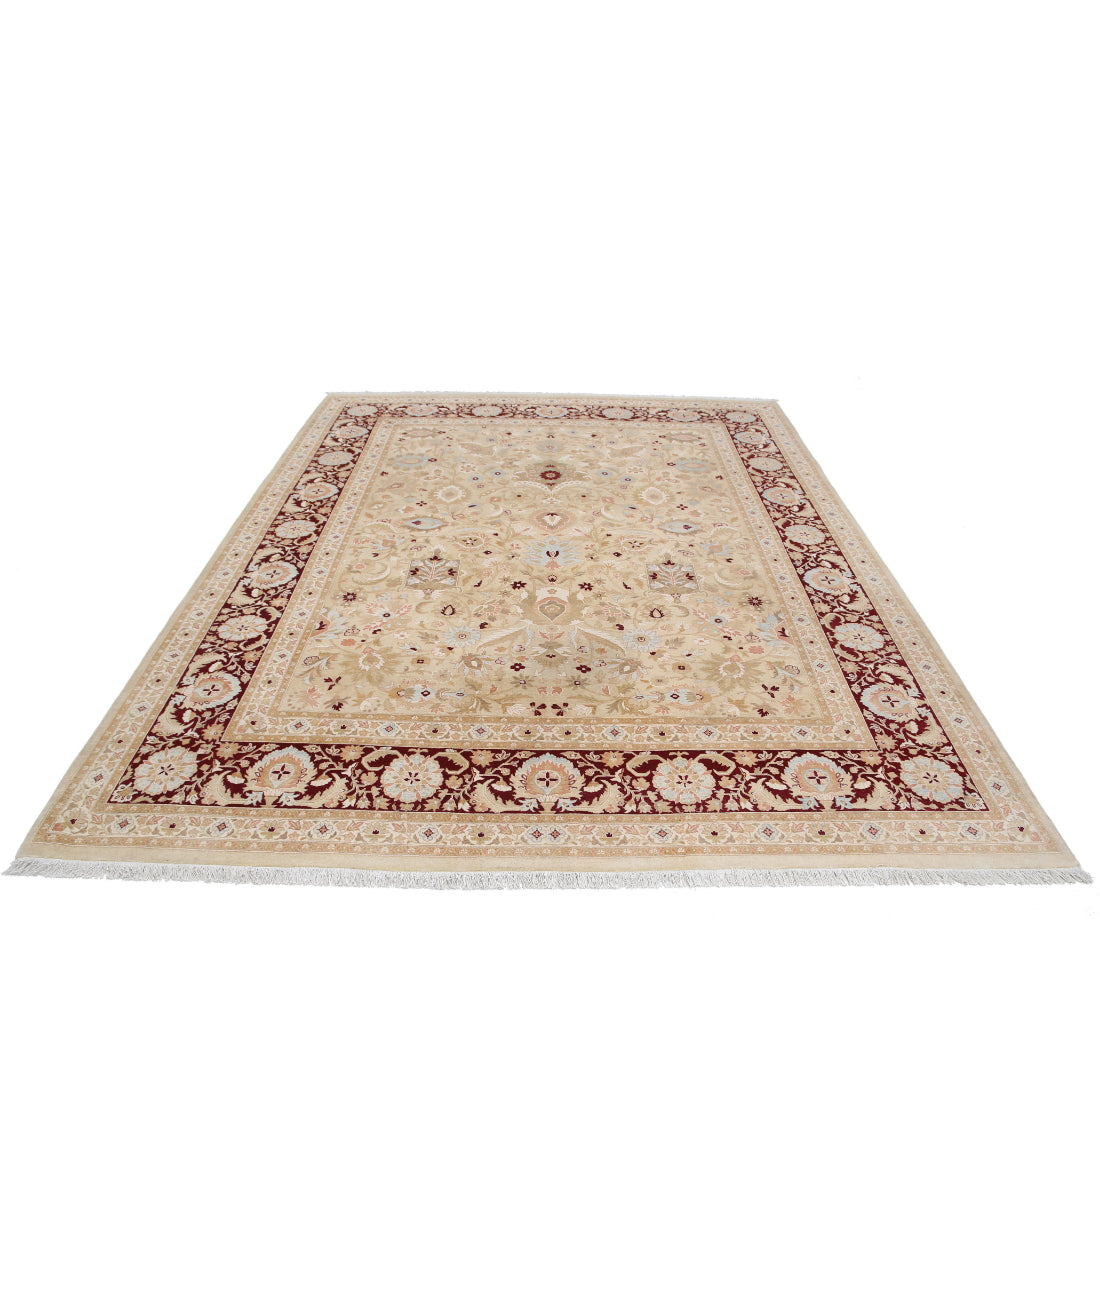 Hand Knotted Heritage Fine Persian Style Wool Rug - 8'1'' x 10'5'' 8'1'' x 10'5'' (243 X 313) / Beige / Burgundy